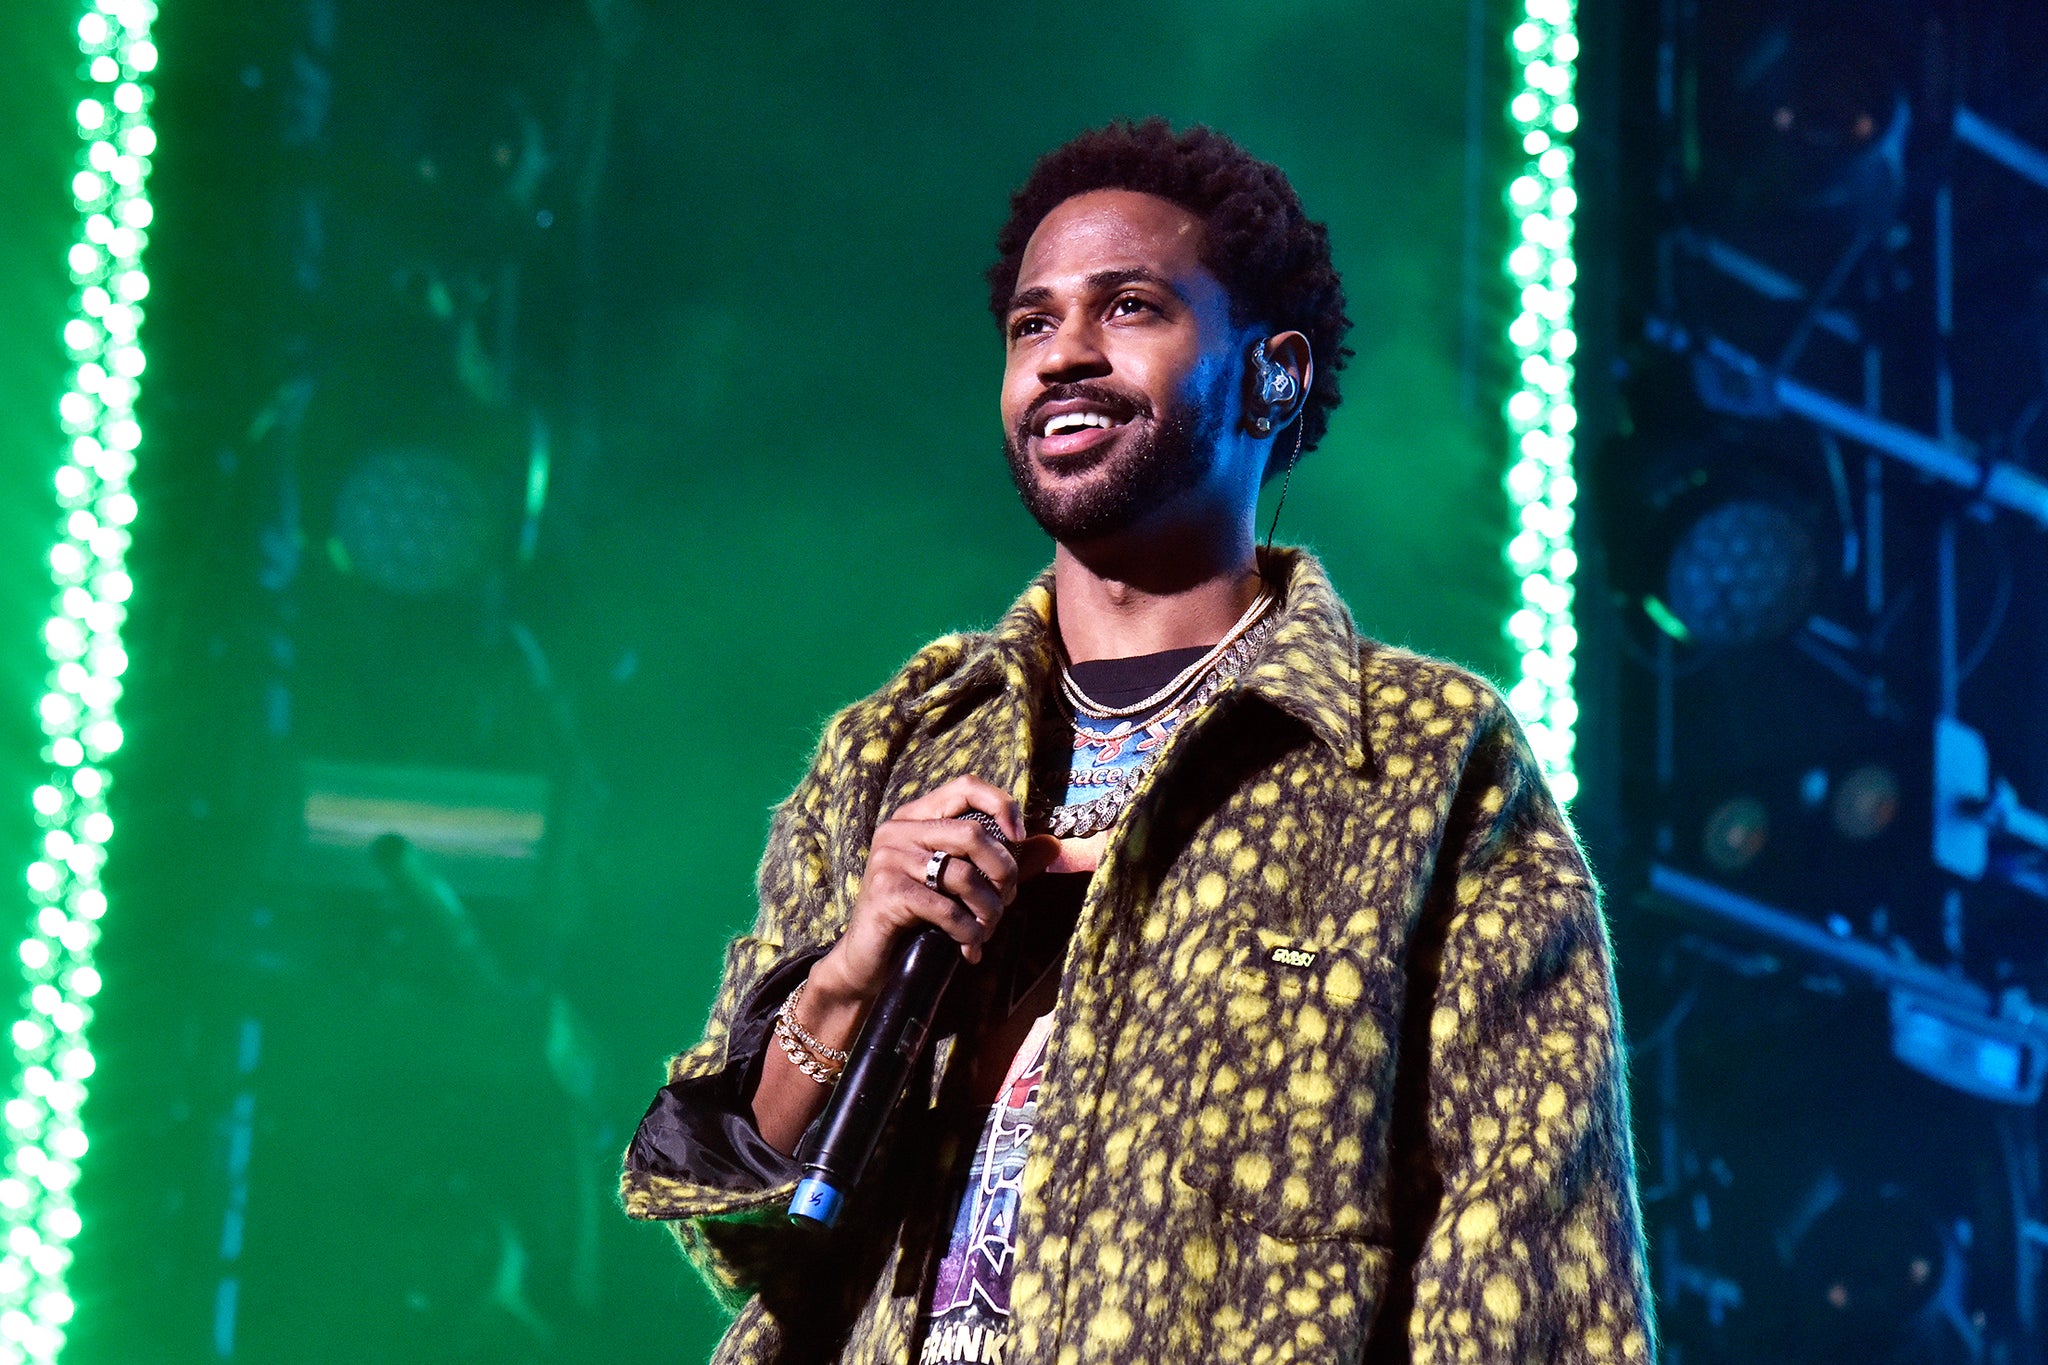 The Inexplicable Disrespect for Big Sean Is at an All-Time High